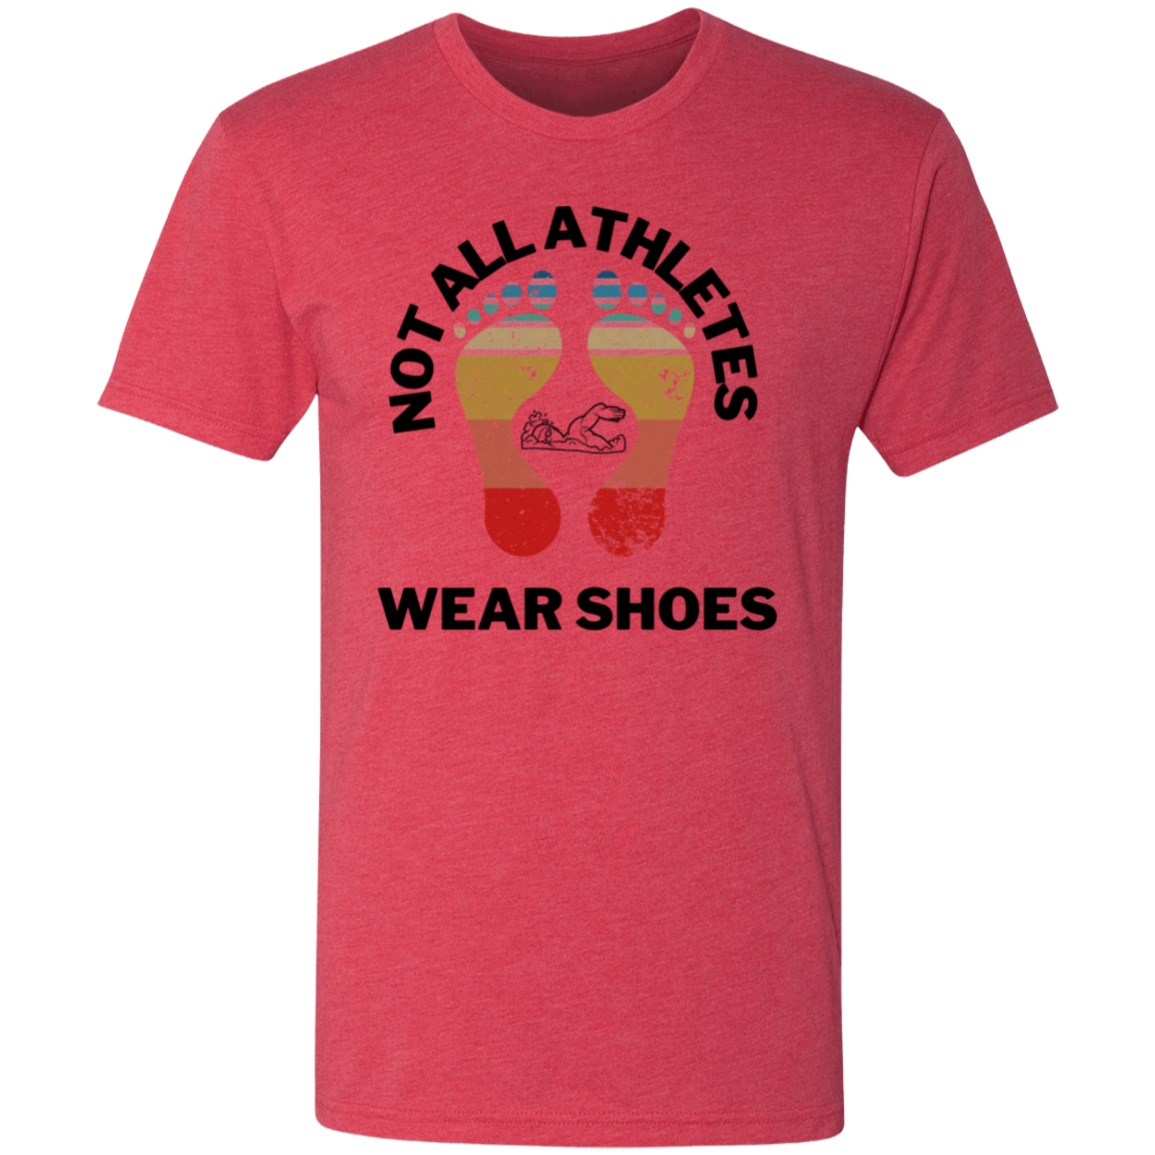 Not All Athletes Wear Shoes- Men's Triblend T-Shirt